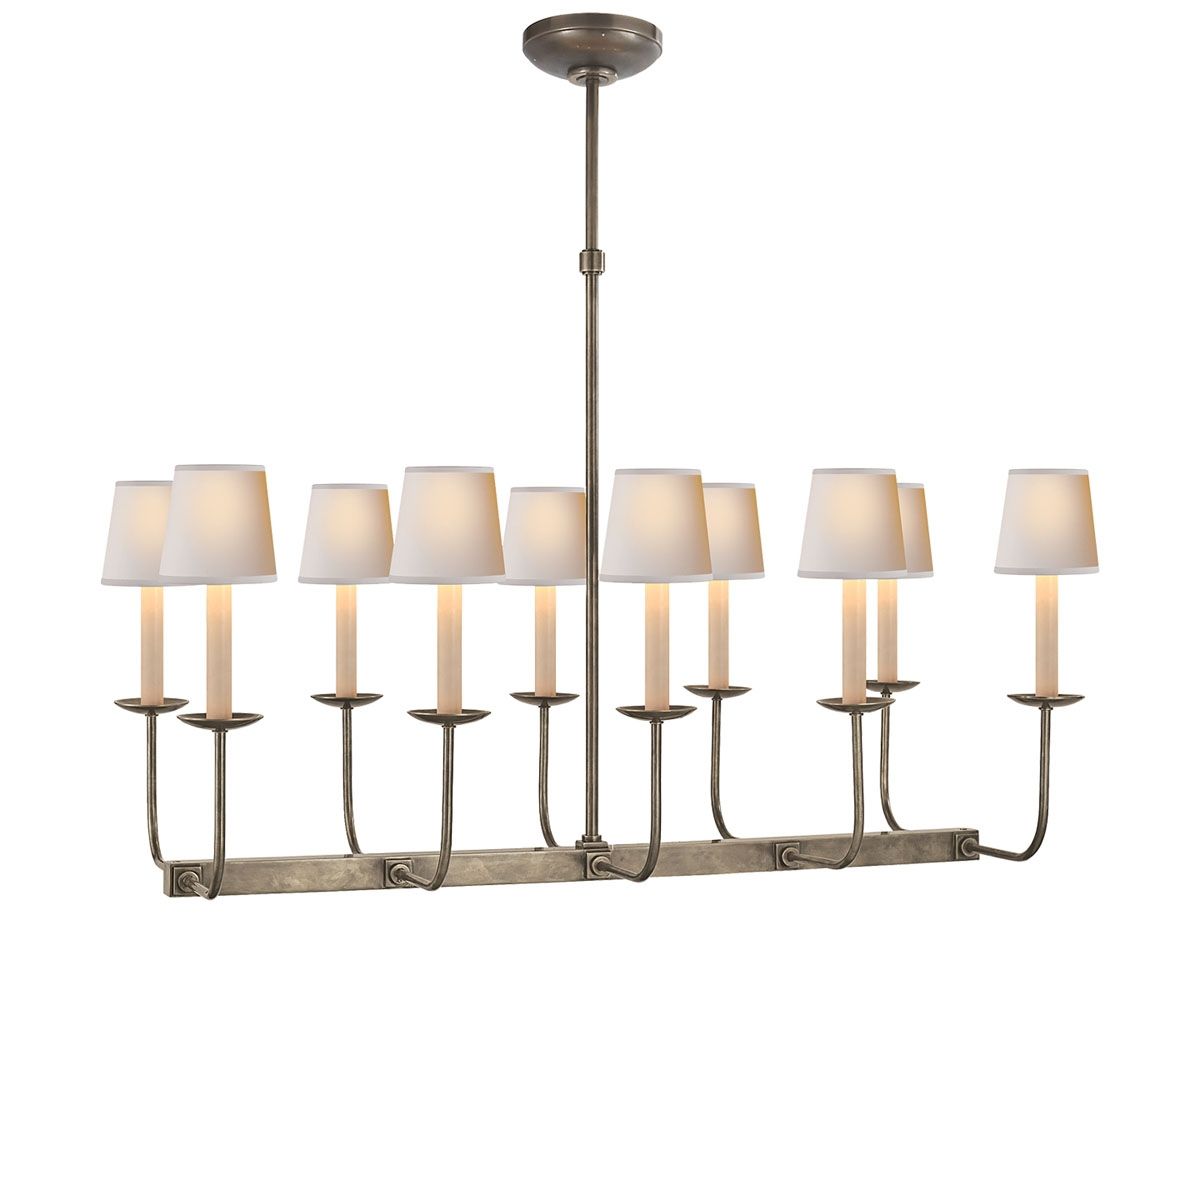 Visual Comfort Linear Branched Chandelier Neenas Lighting In Branched Chandelier (View 6 of 12)